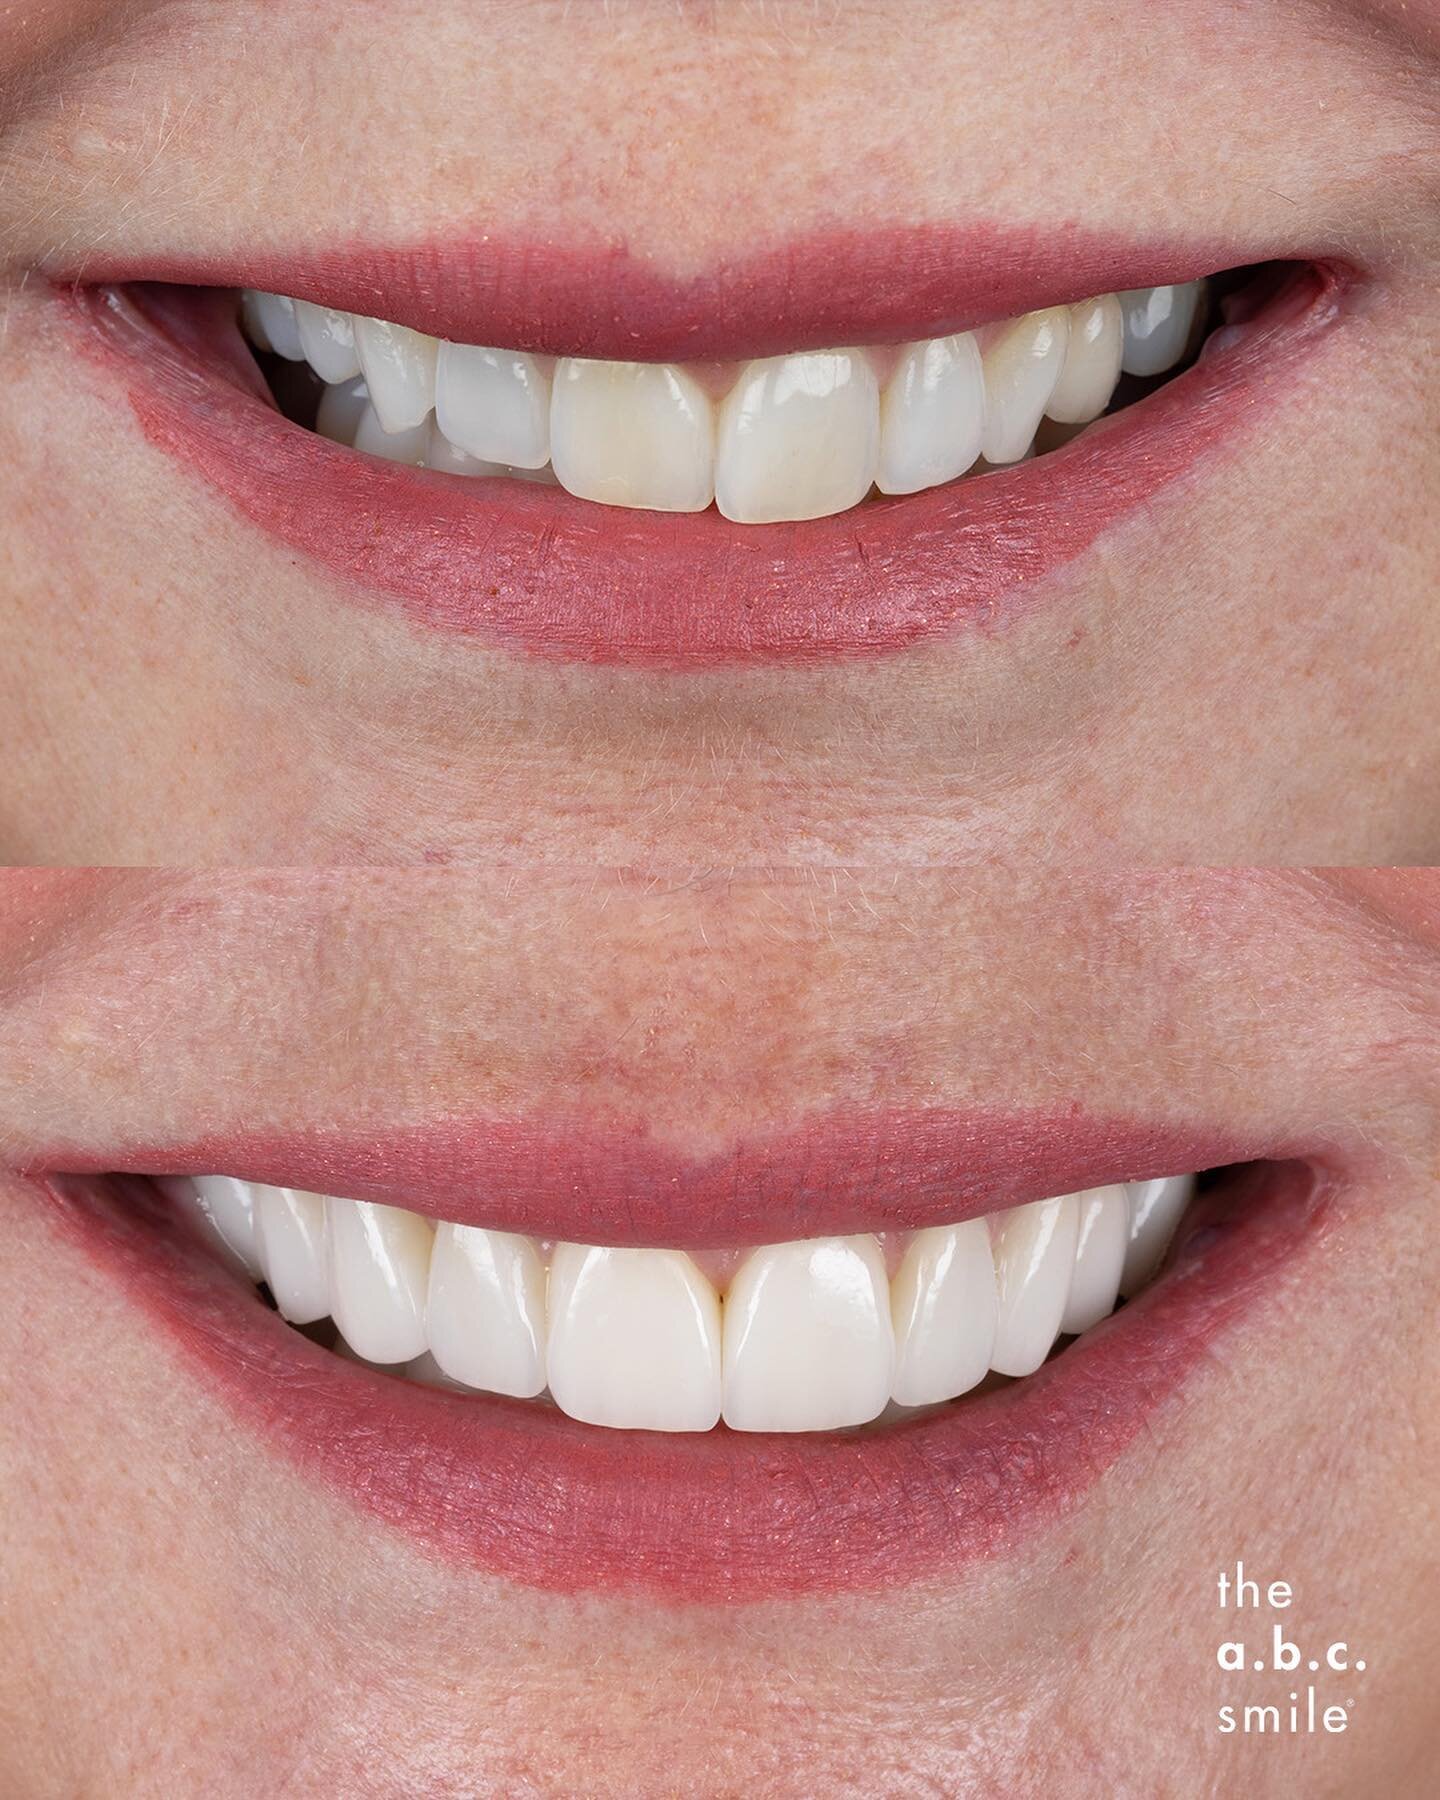 👄 Your Full Smile 👄⁣
⁣
We take you through a journey of design and discovery of what is possible in your smile with the contemporary approaches in our cosmetic dentistry.⁣
⁣
You can achieve symmetrically fuller smiles that are balanced with your li